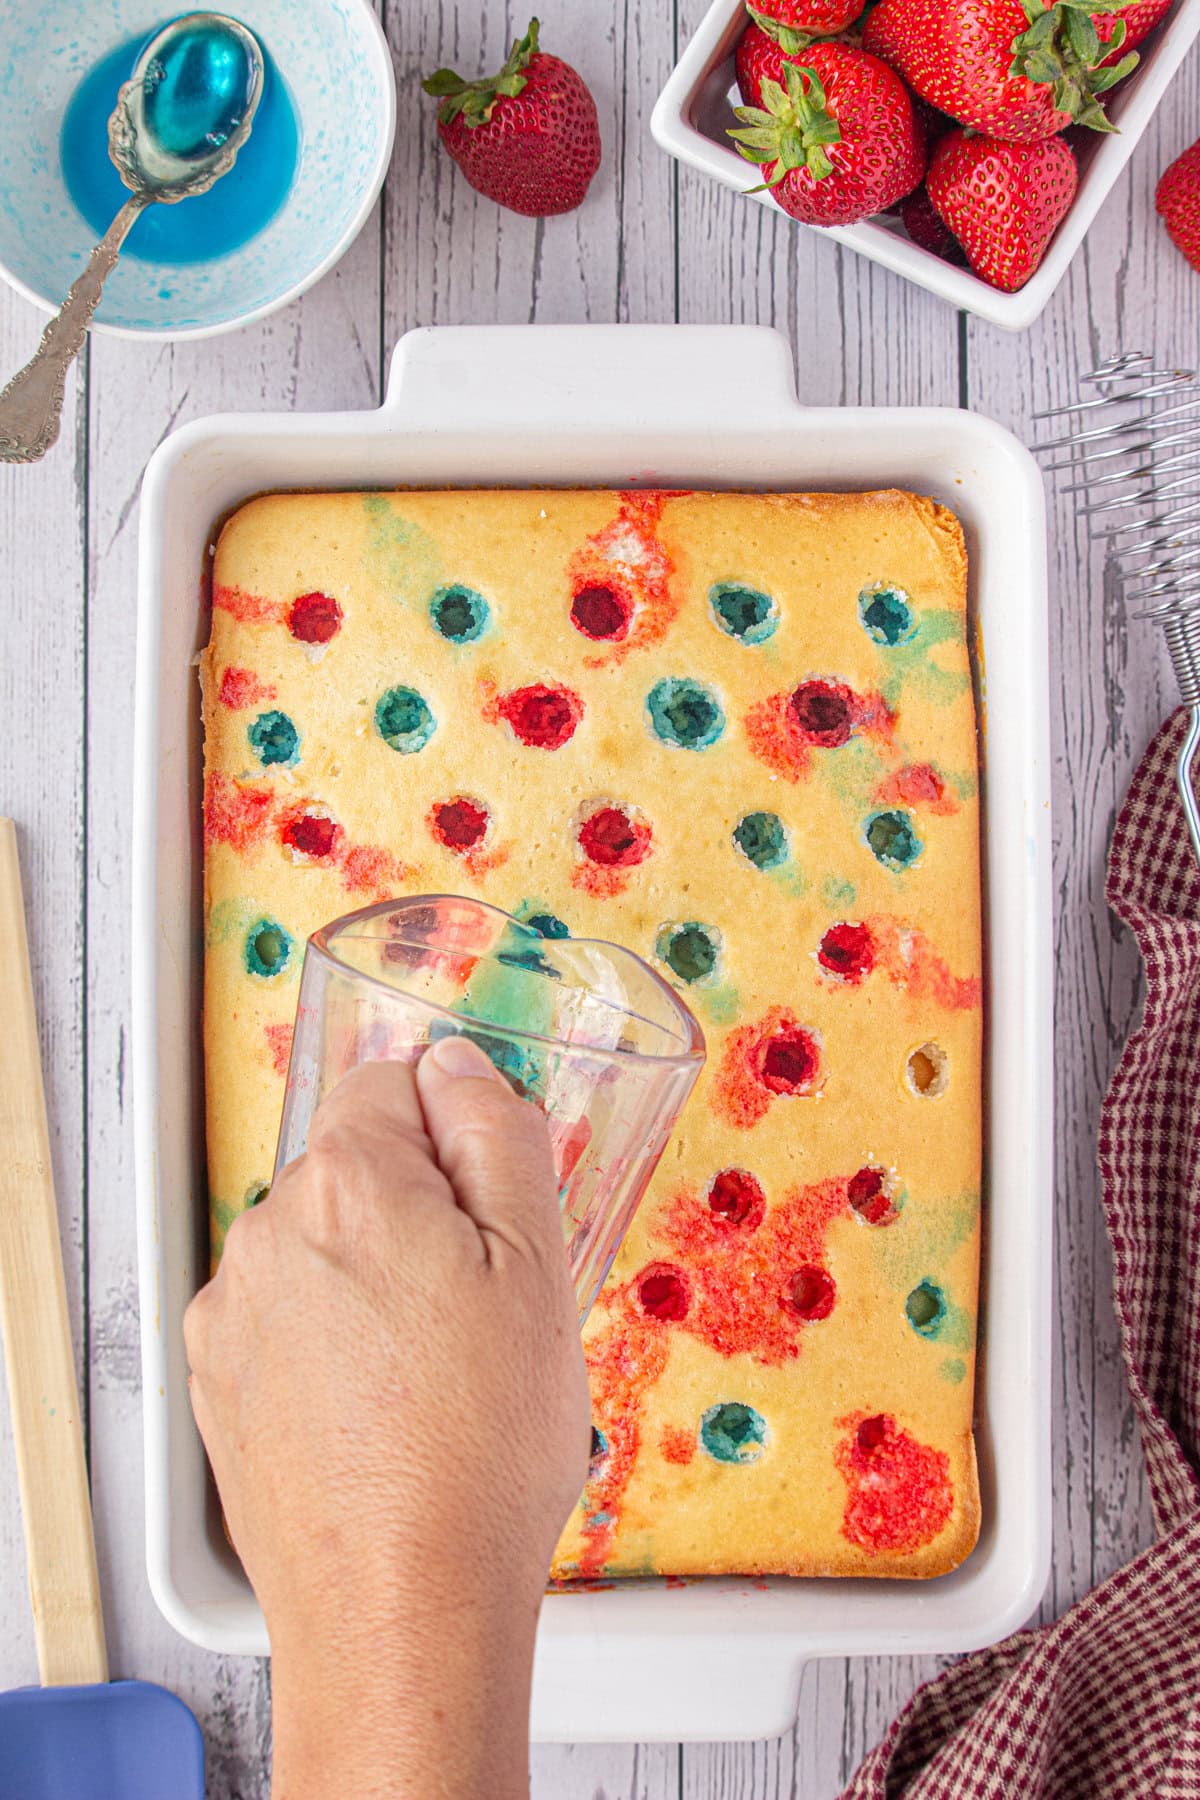 Pouring liquid Jello into the holes that have been poked in the baked cake.